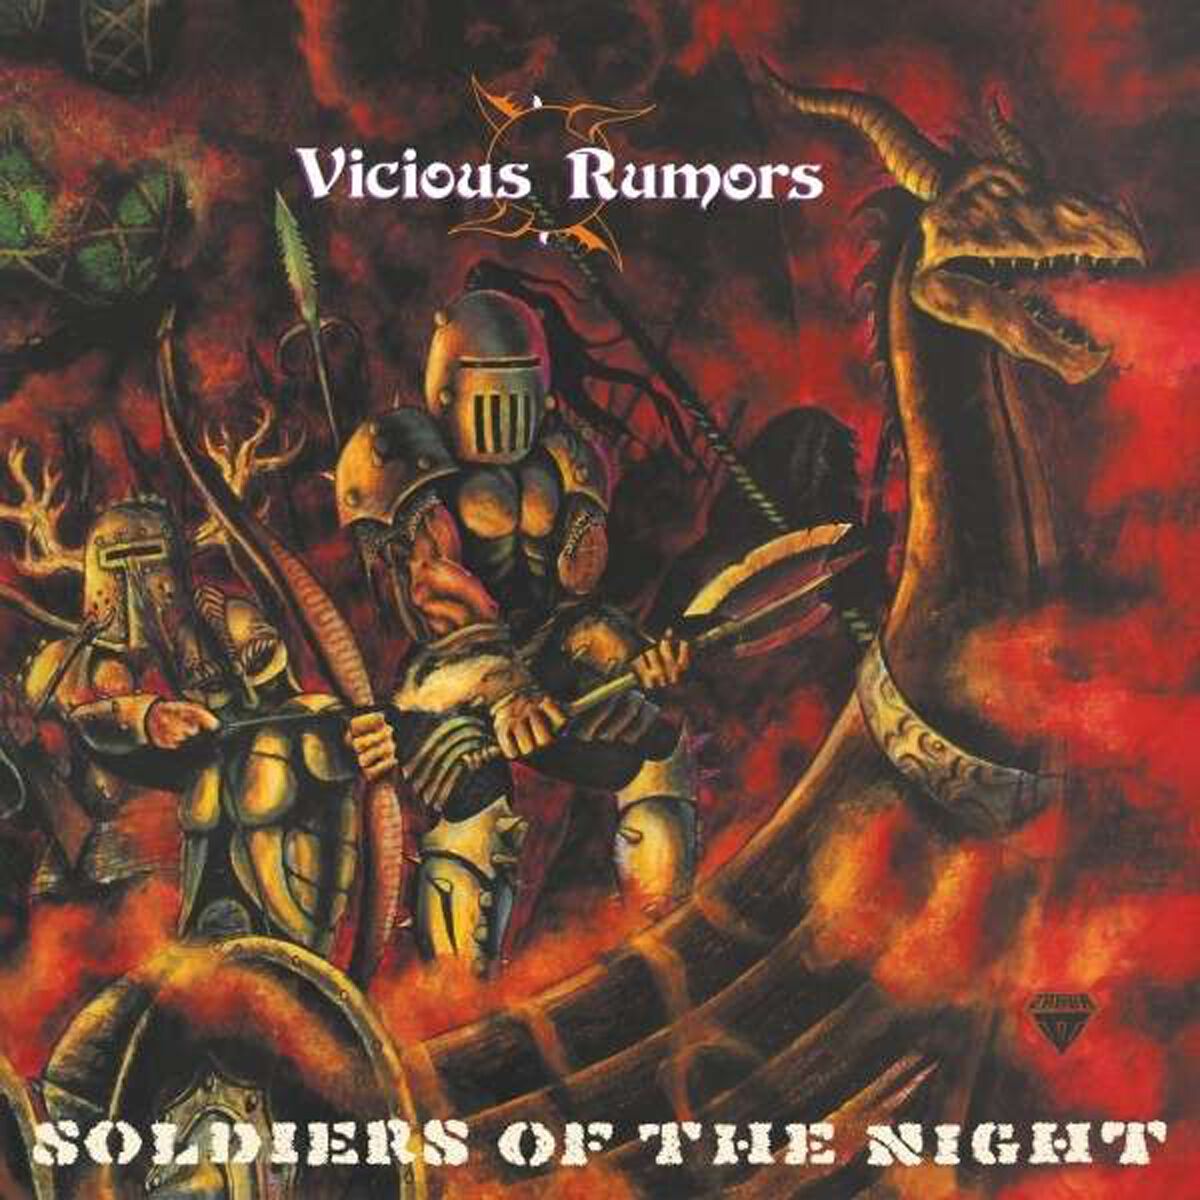 Levně Vicious Rumors Soldiers of the night LP standard